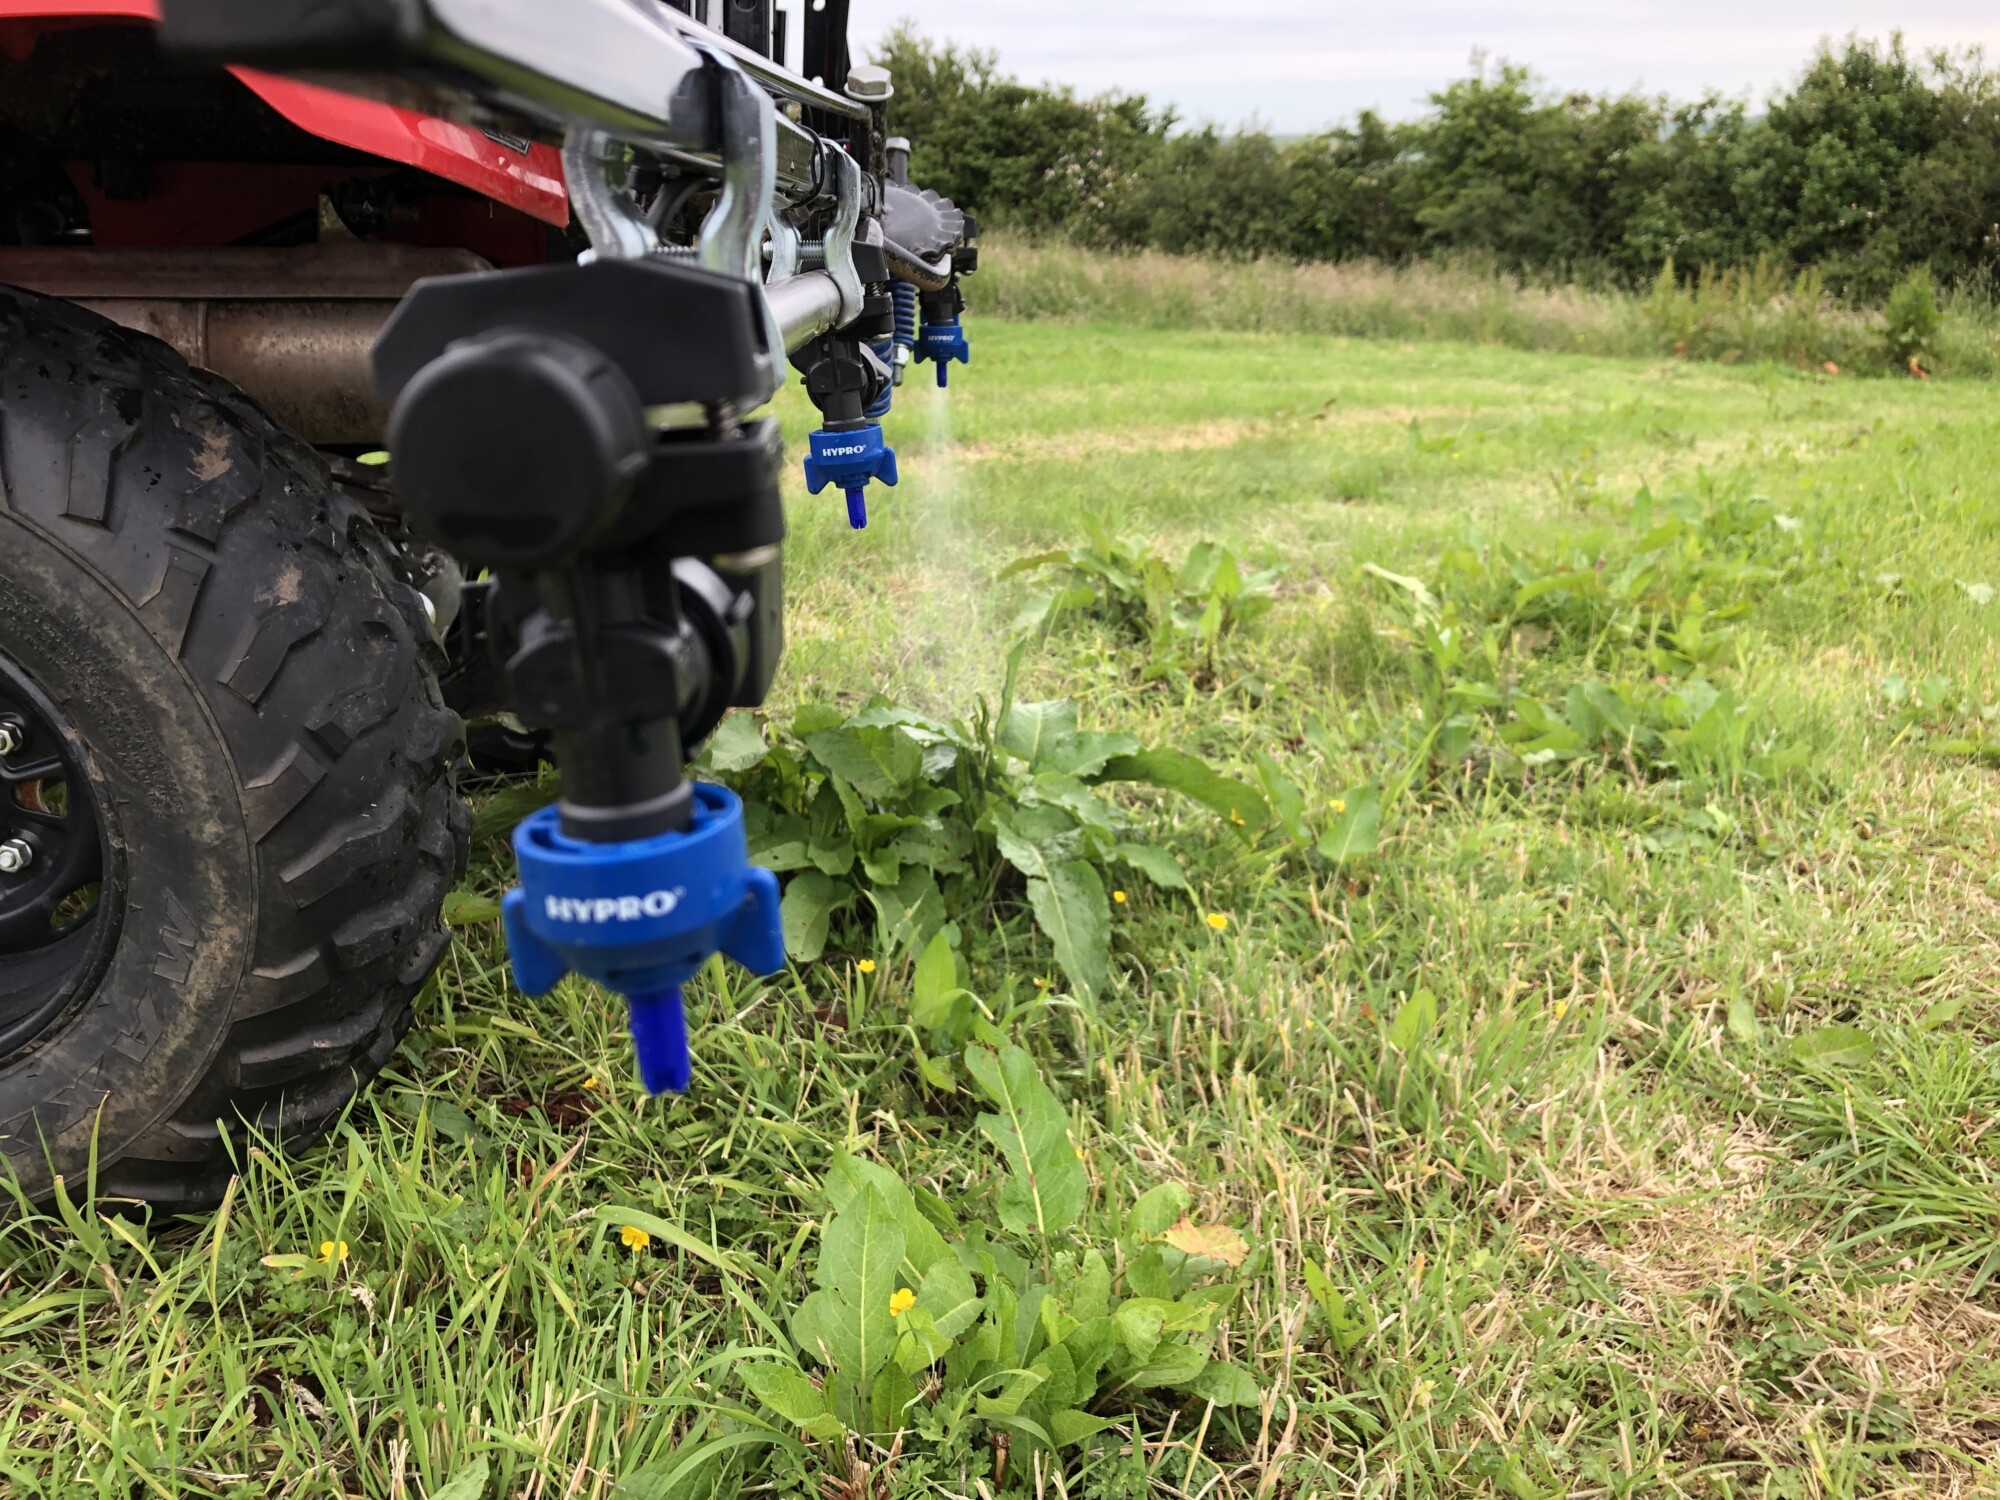 New technology in the fight against grassland weeds